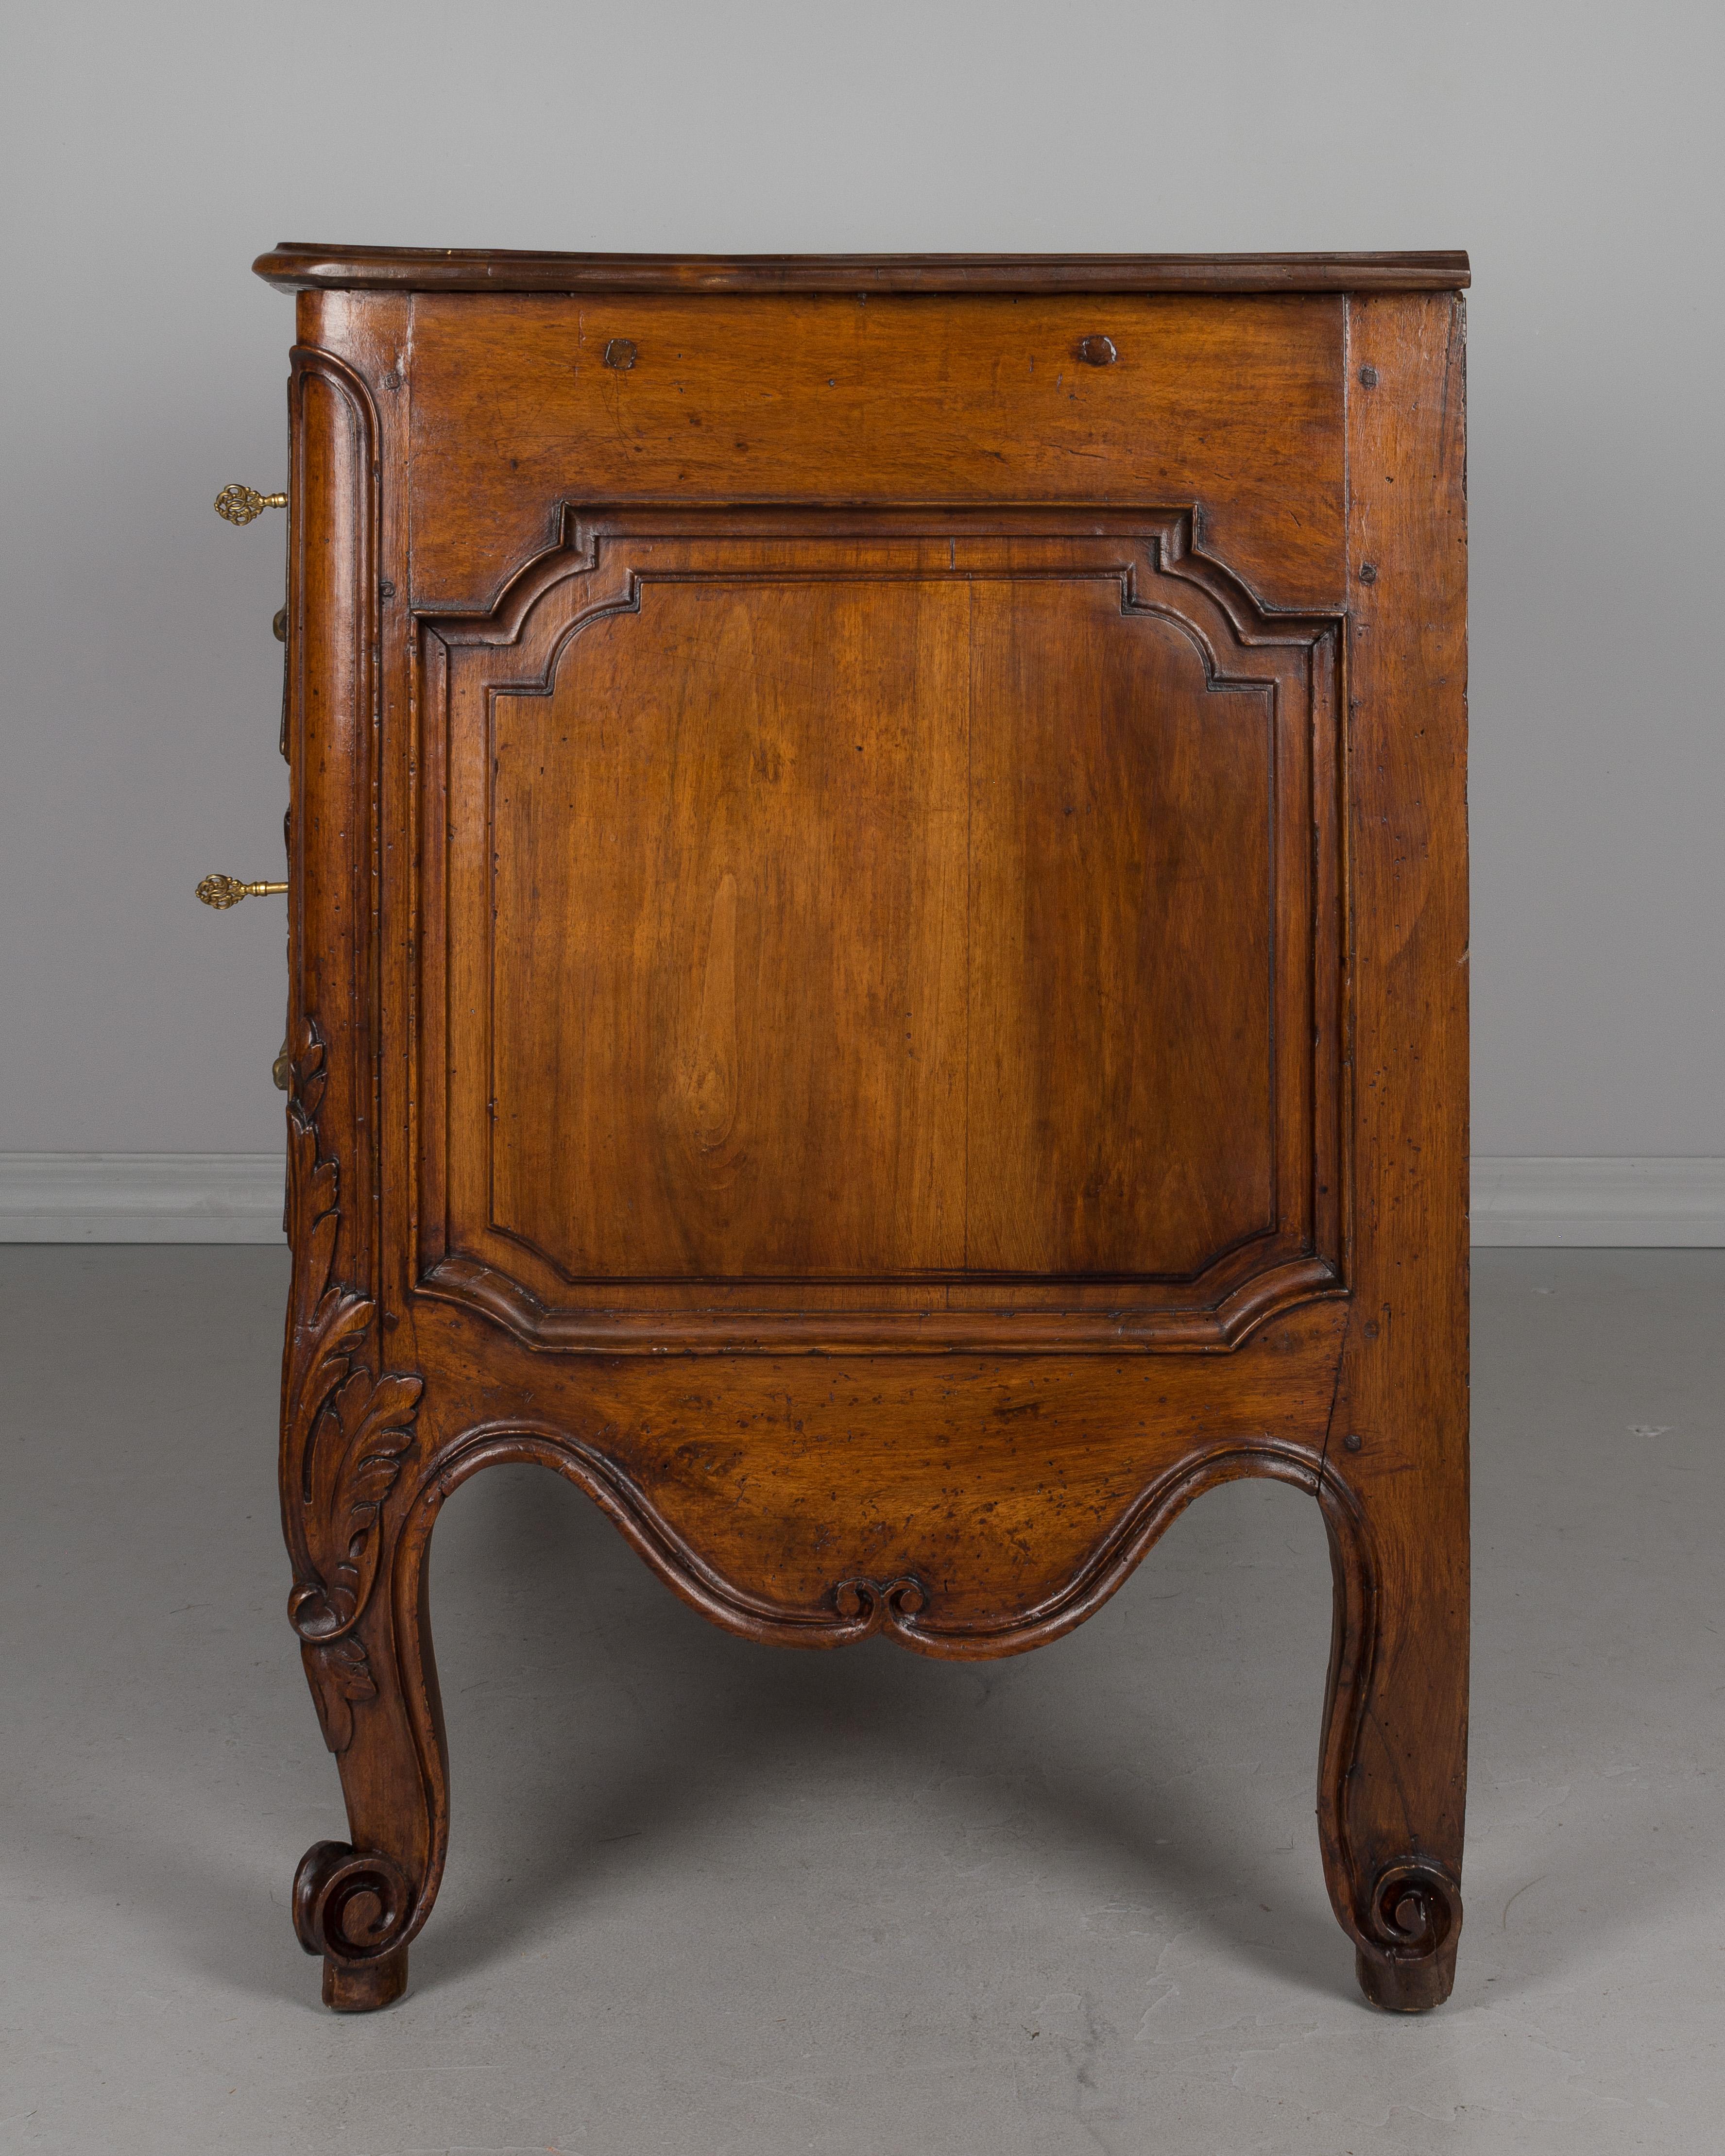 18th Century Louis XV Period Commode or Chest of Drawers (Französisch)